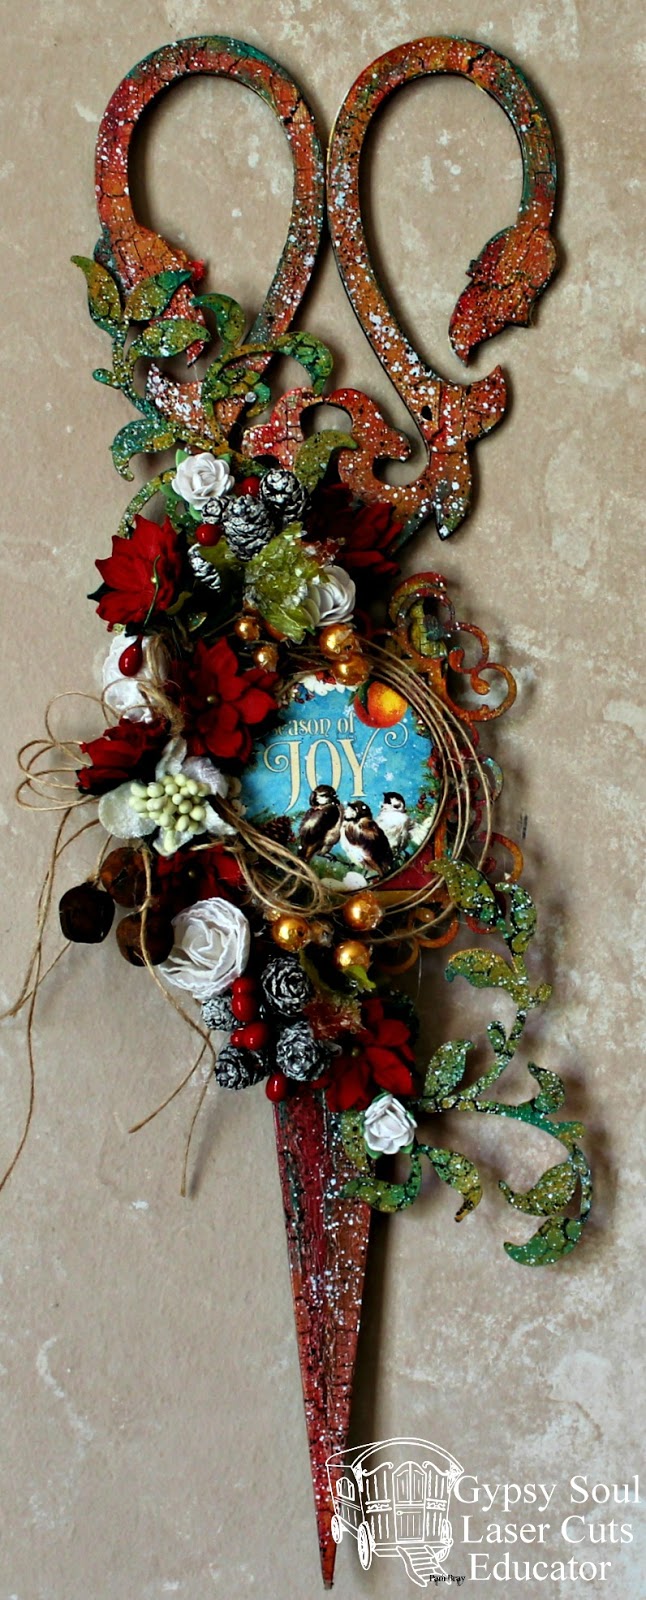 Pam Bray Designs: A Girl with Flair: Seasons of Joy Christmas Scissors with  Gypsy Soul Laser Cuts